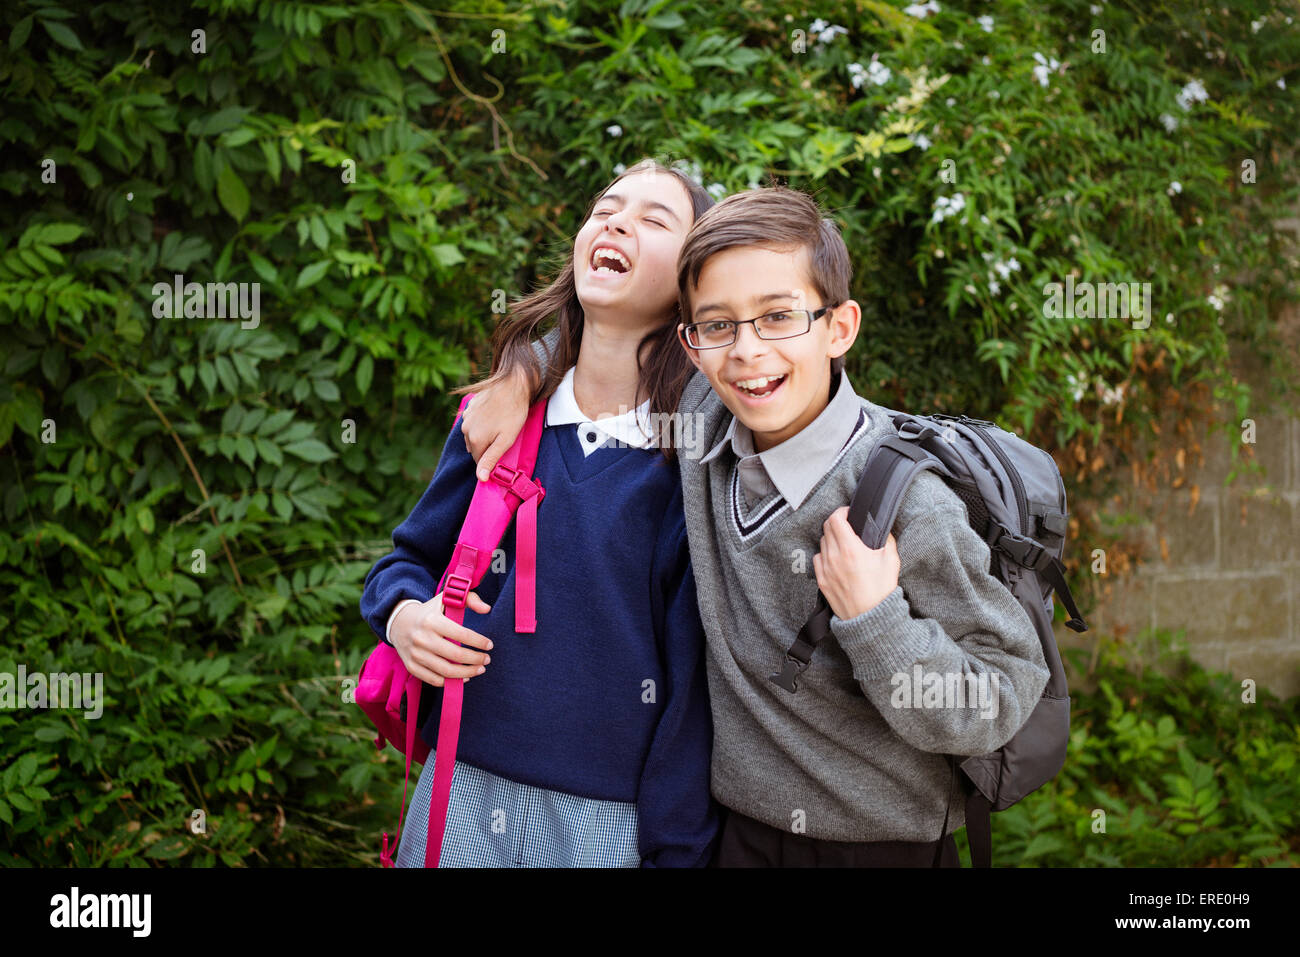 Mixed race brother and sister laughing in school uniforms Stock Photo